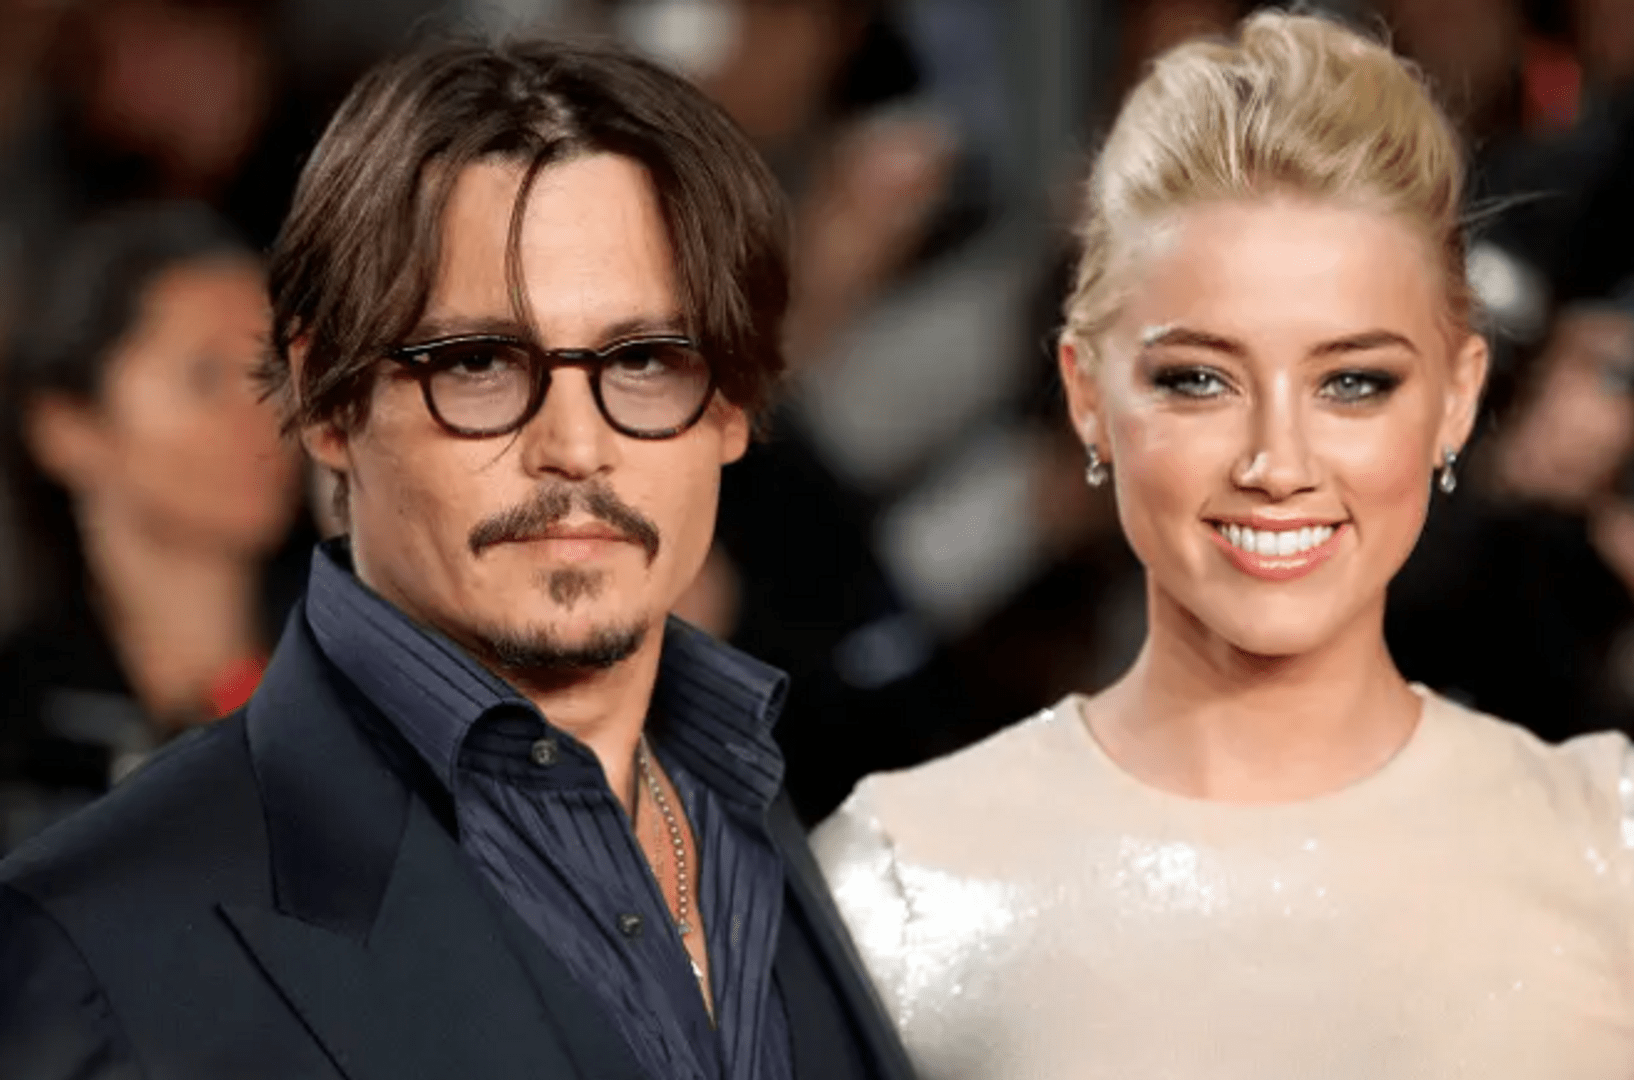 'I've always loved Johnny': Amber Heard makes a public statement ahead of the new libel trial